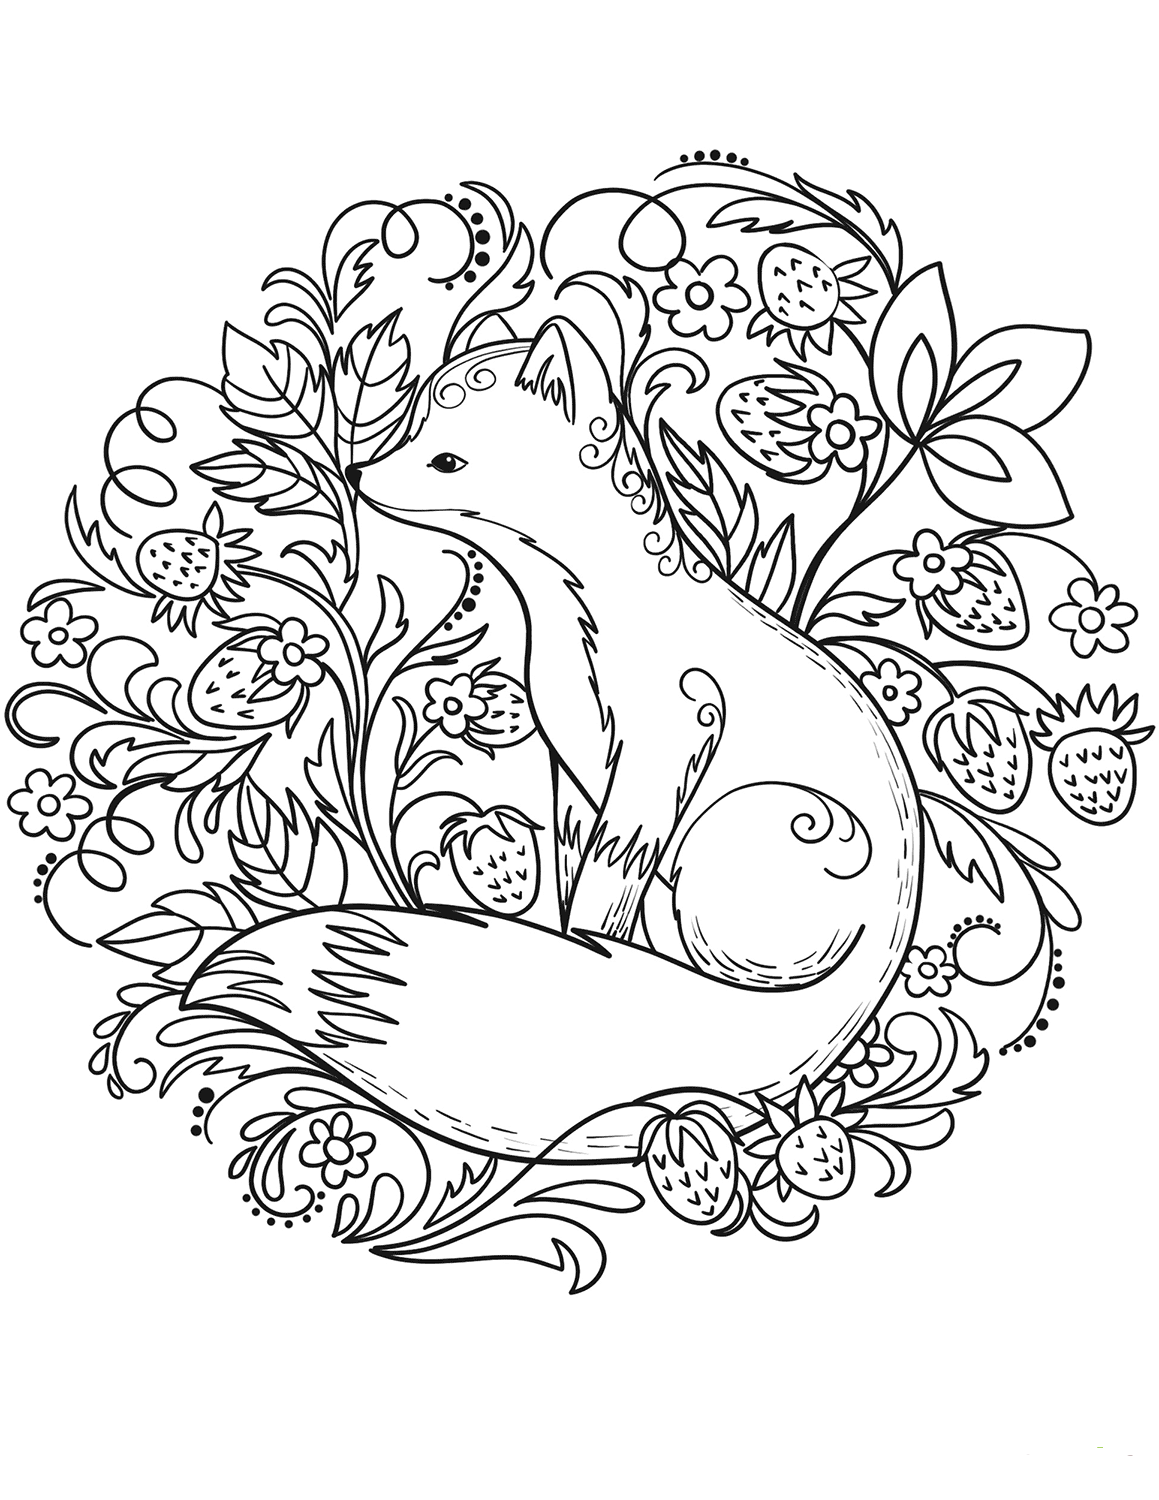 fox-coloring-pages-free-printable-coloring-pages-for-kids